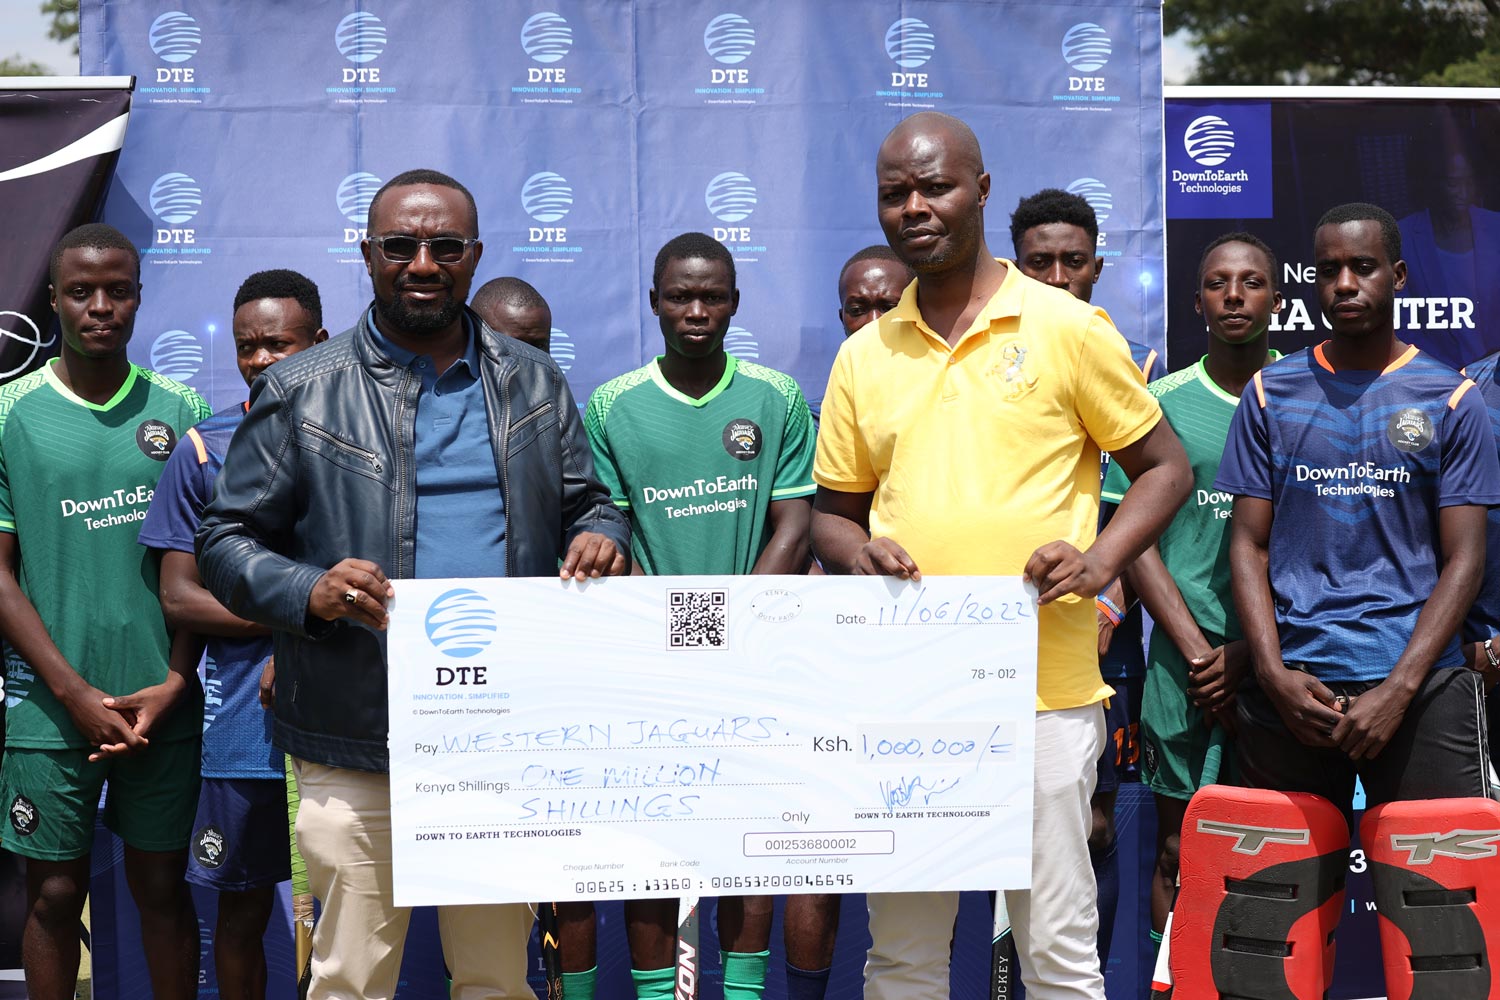 DTE's Managing Director, Vincent Milewa (right) and Western Jaguras' president Dr. Wilfred Mutubwa with the team at City Park Hockey Stadium in Nairobi.